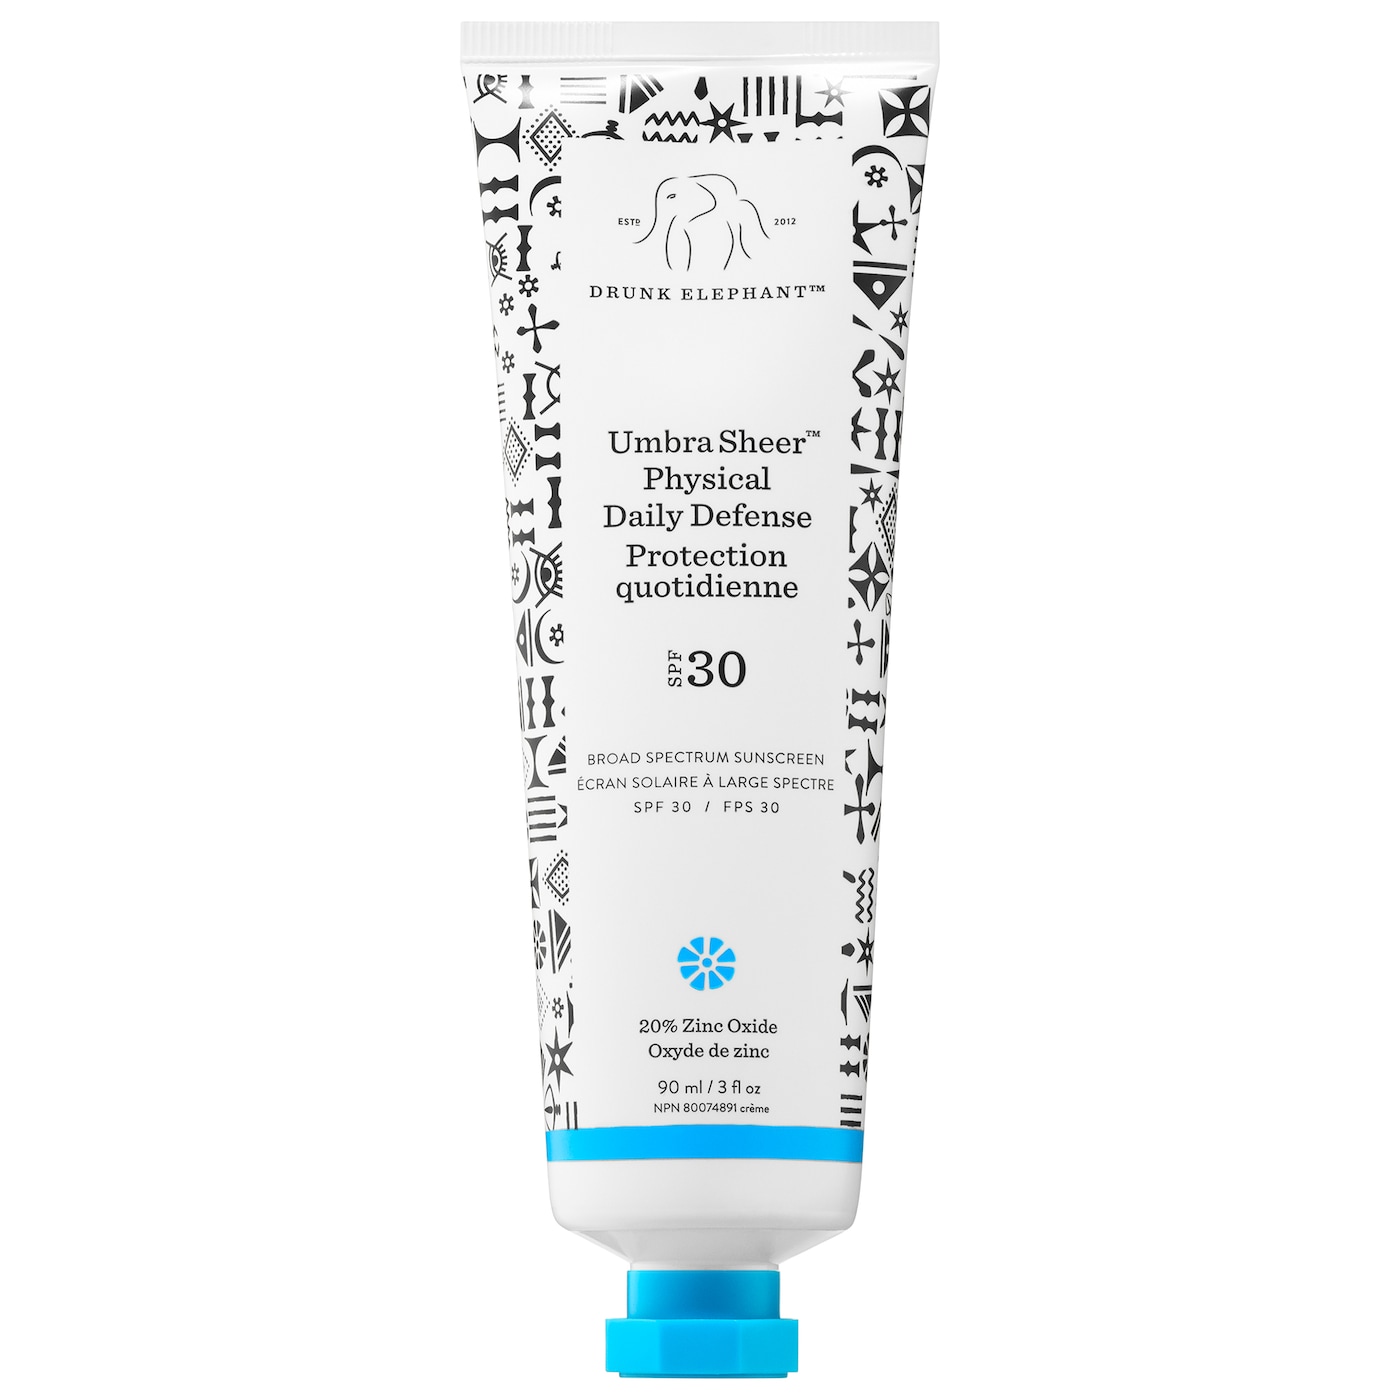 Drunk Elephant Umbra Sheer Physical Daily Defense SPF 30, one of the best sunscreens for sensitive skin